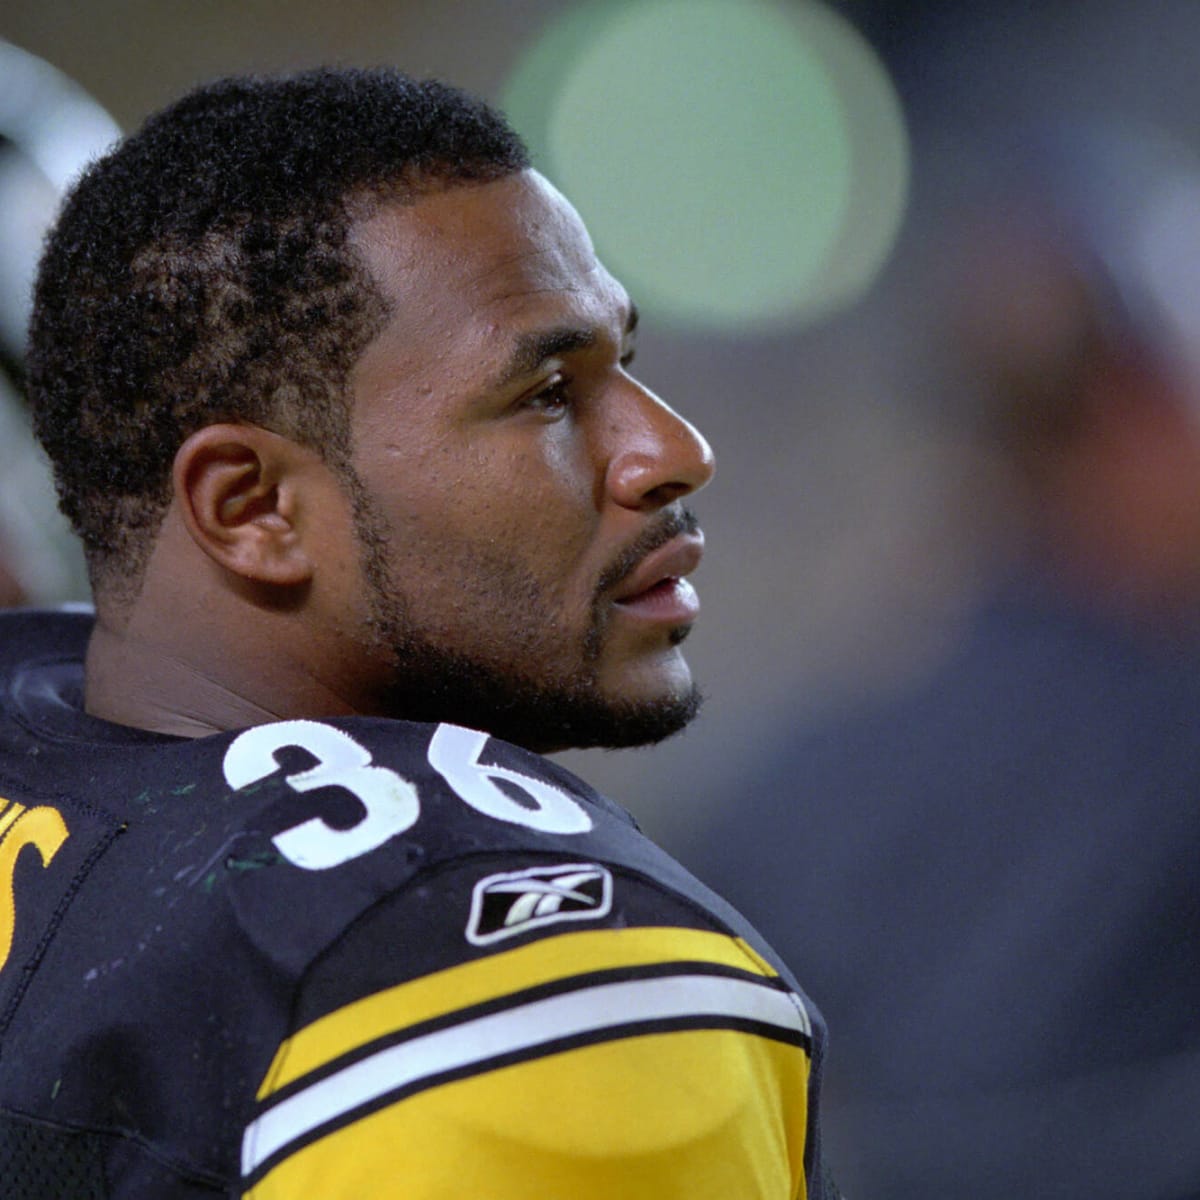 Would you say Jerome Bettis is among the top 15 NFL running backs in  history? - Quora